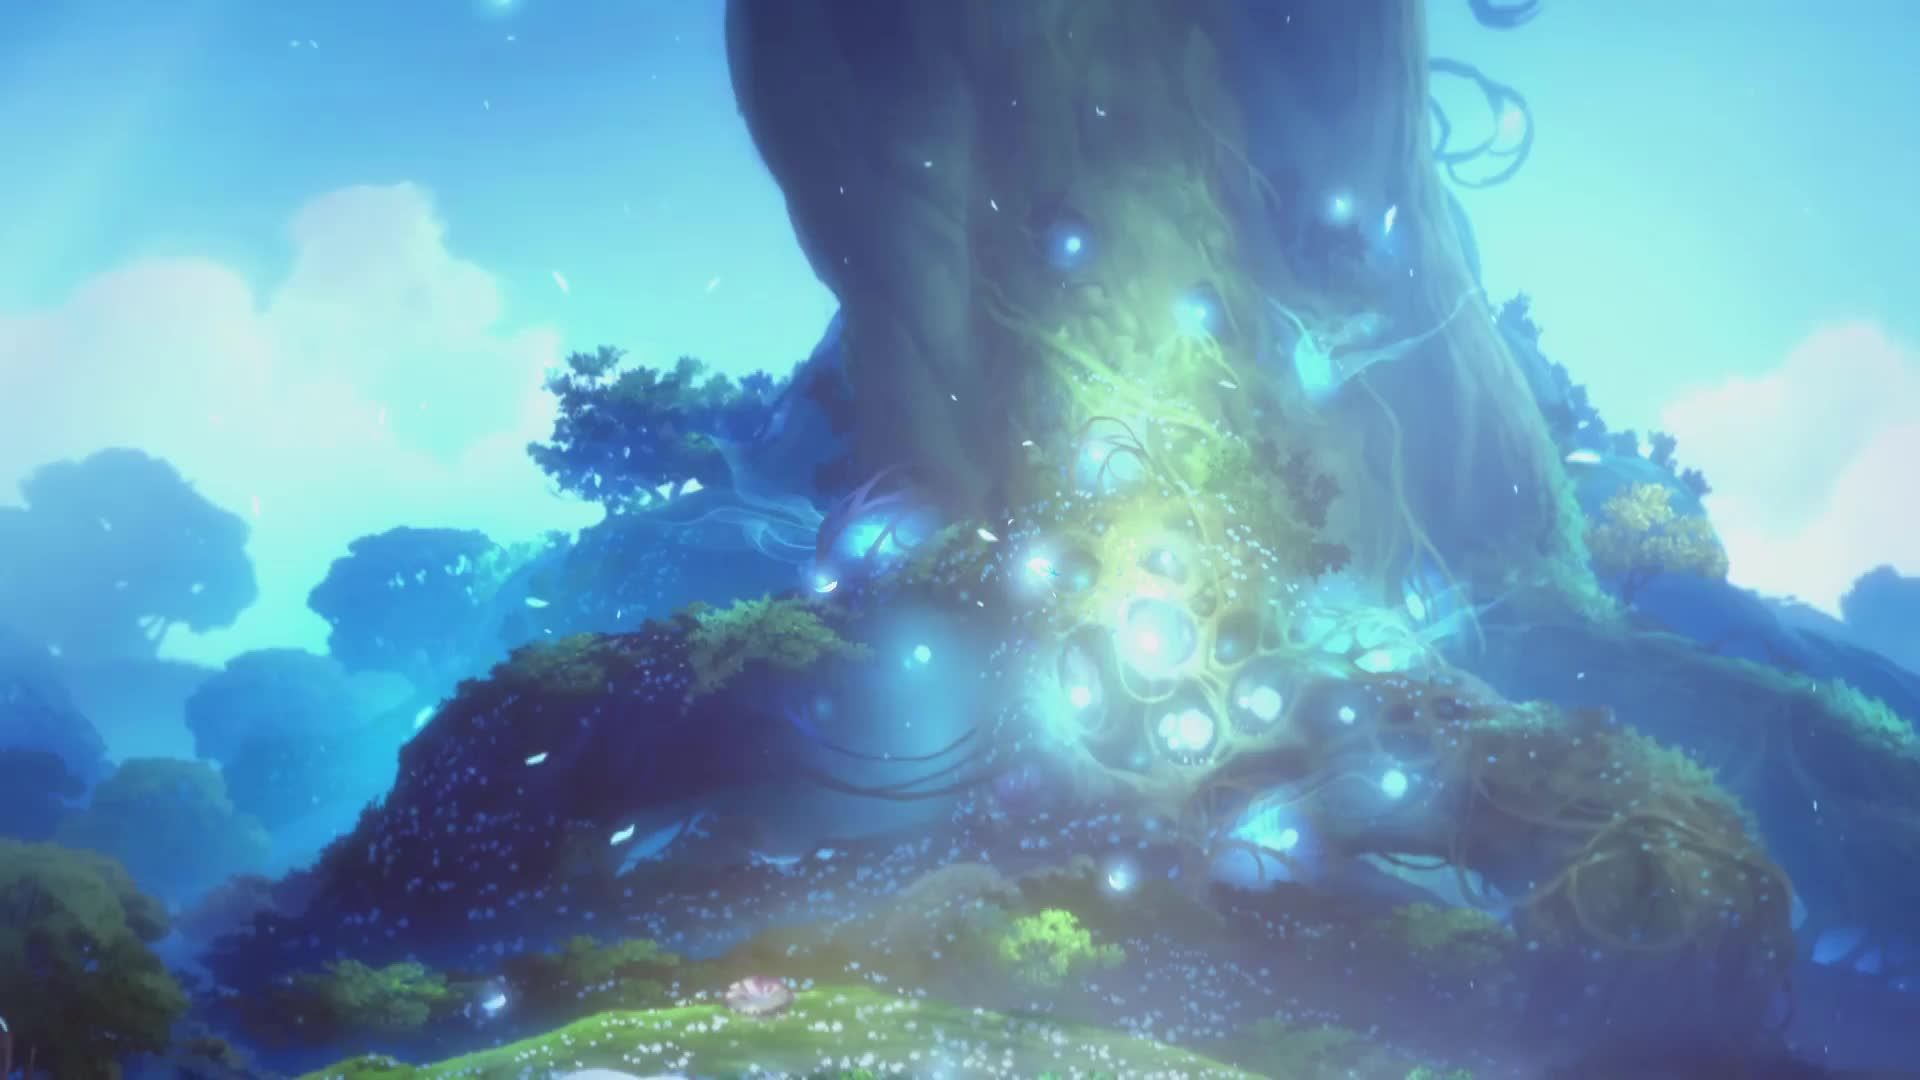 1920x1080 Ori And The Blind Forest Full Live Wallpaper DesktopHut | Live wallpapers, Gaming wallpapers, Wallpaper